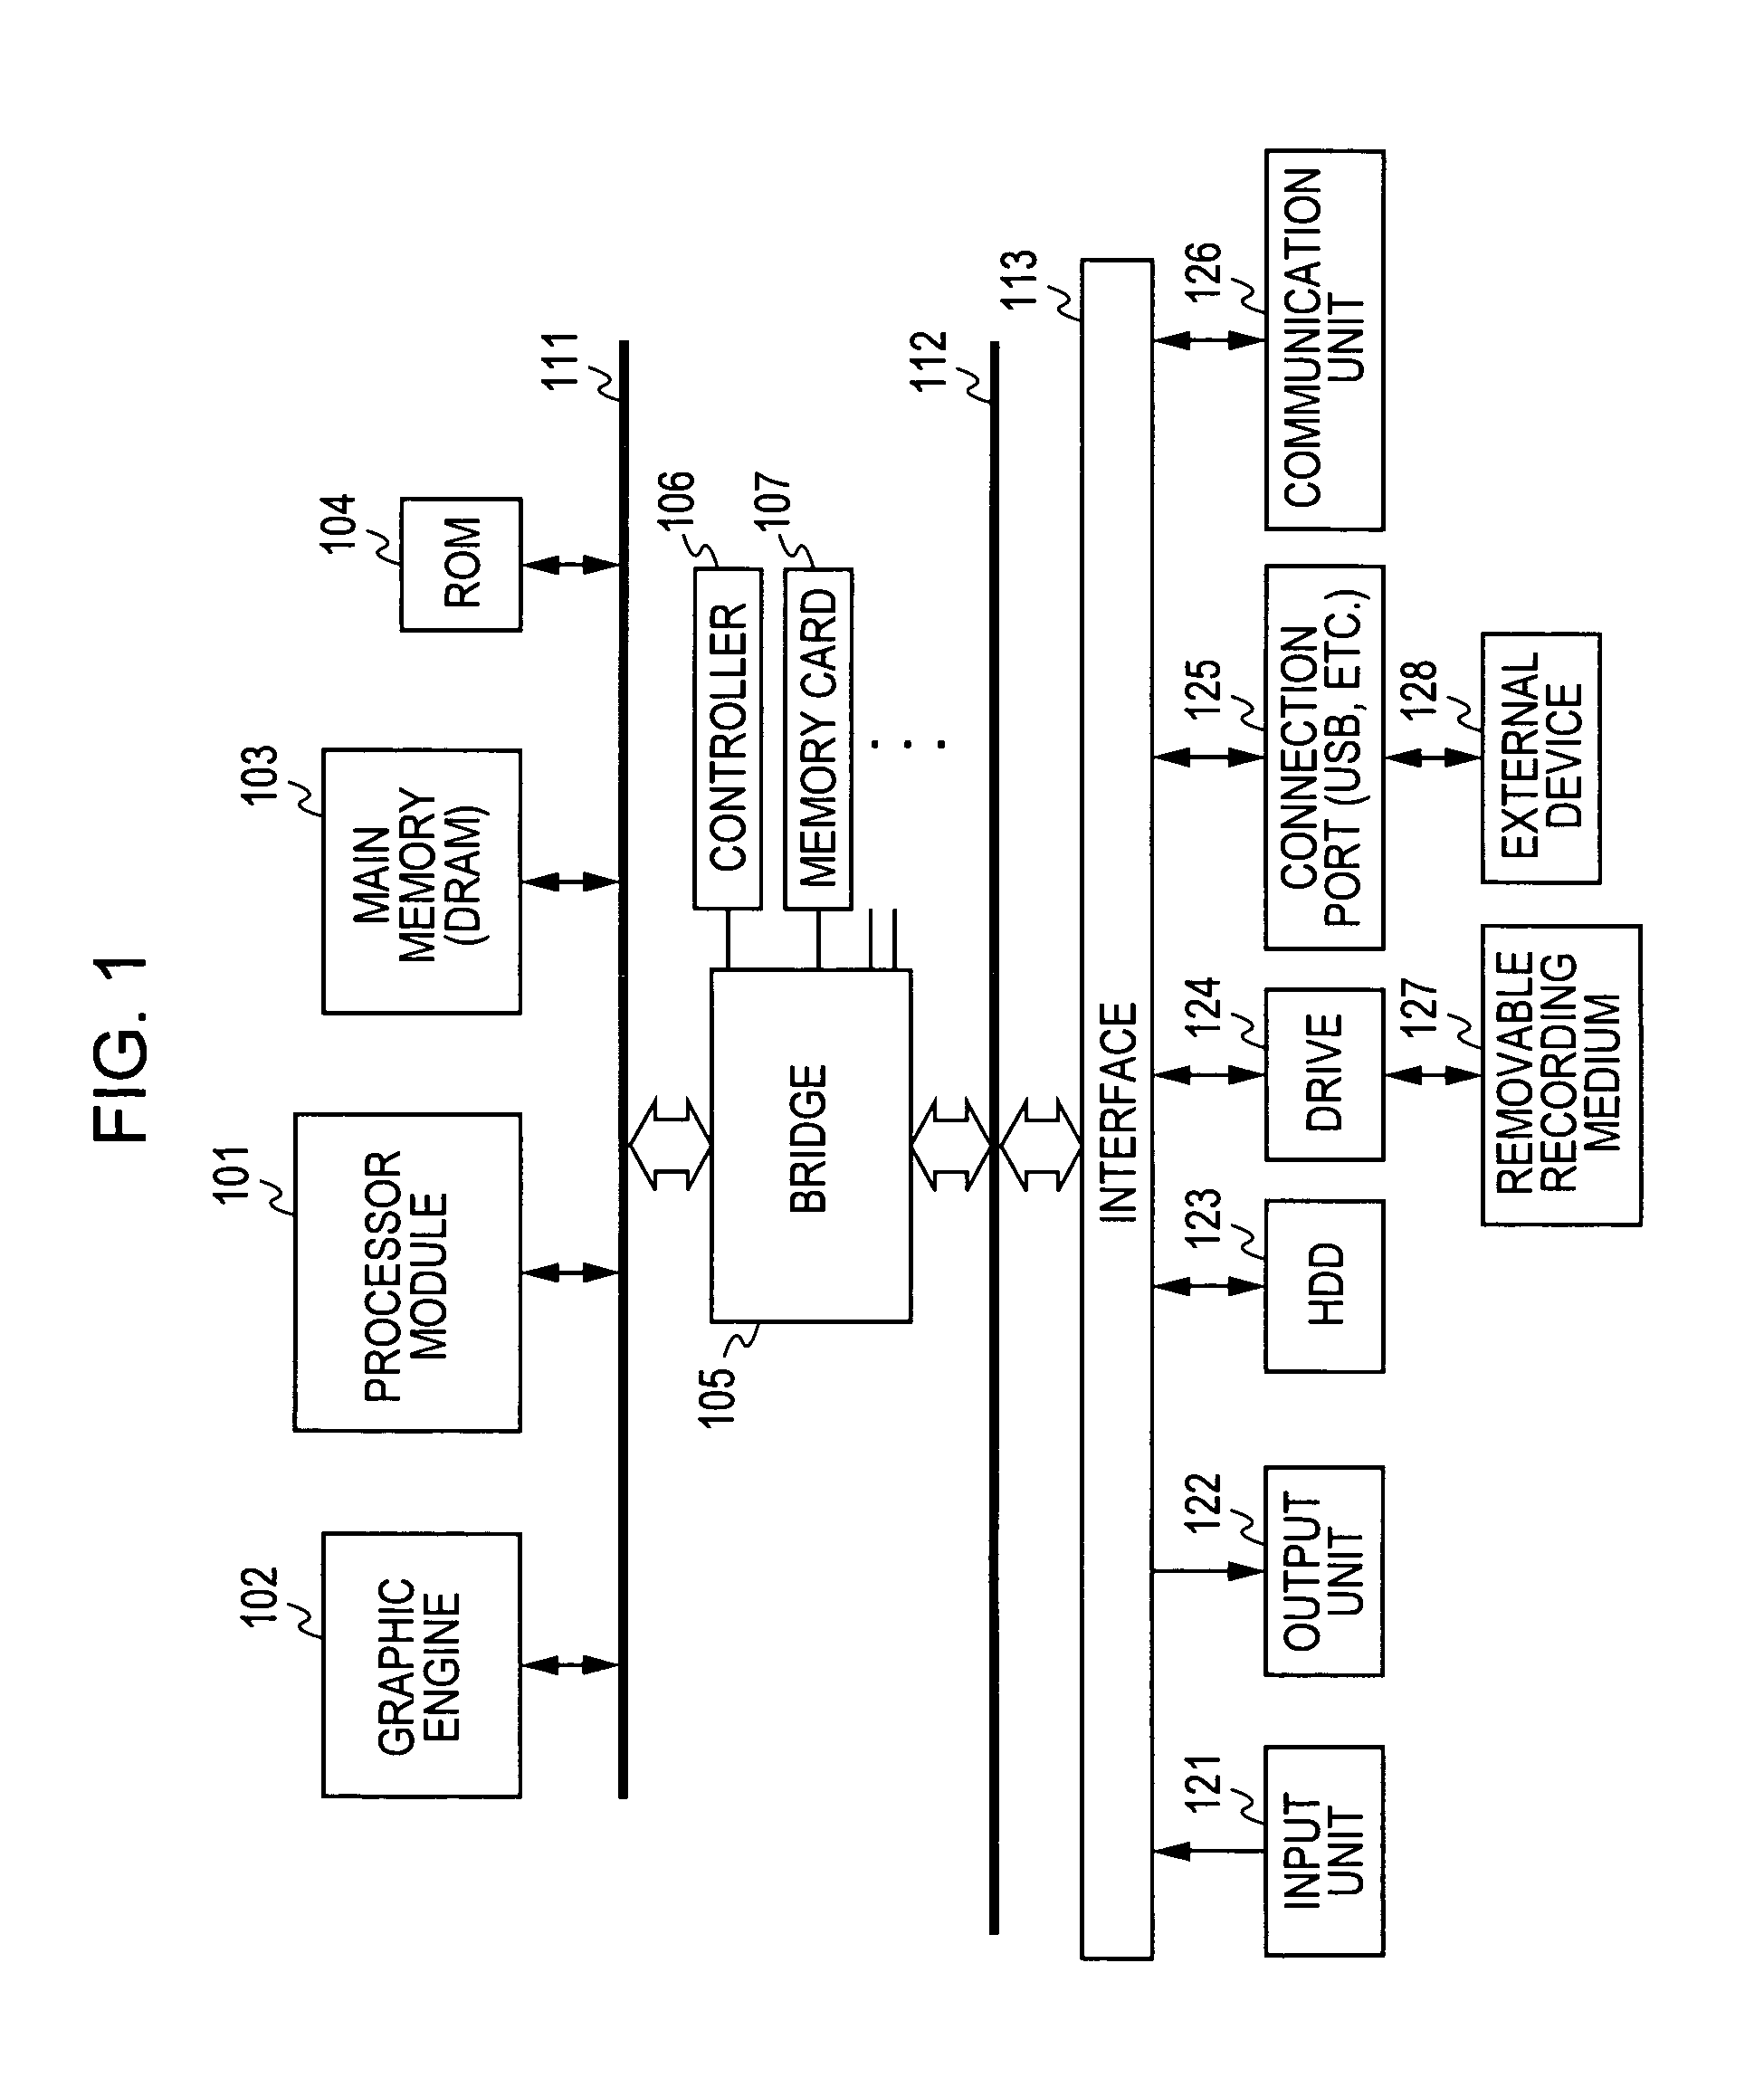 Apparatus, method, and computer program for setting and updating a relationship between a logical processor and a physical processor